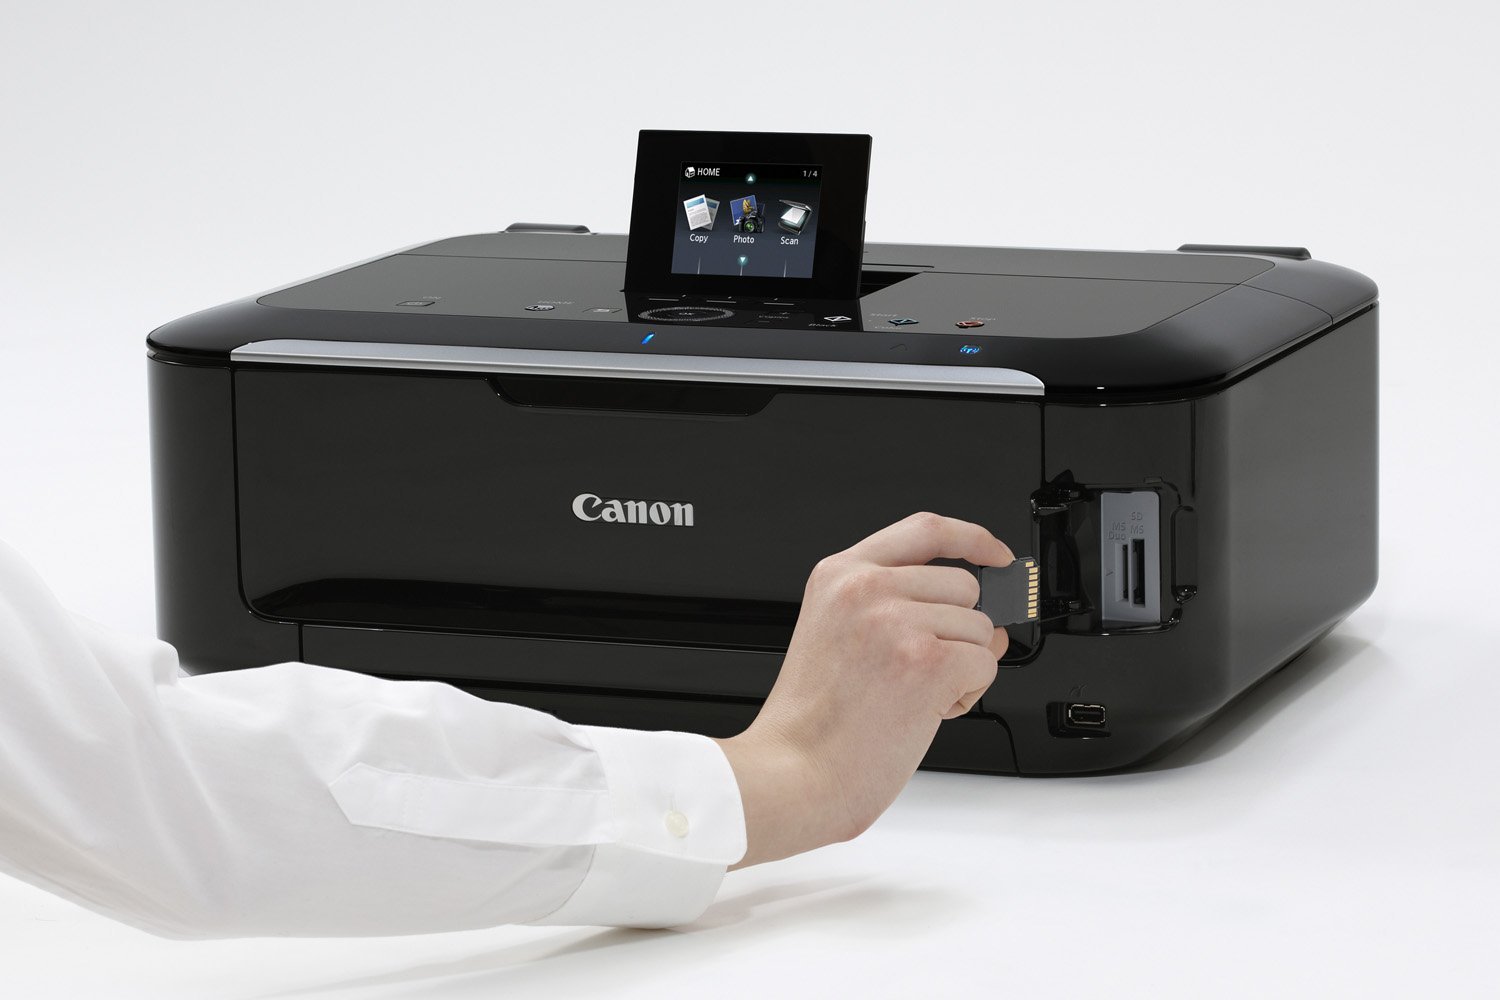 Canon Pixma Mg5320 Wireless Inkjet Photo All In One Printer 5291b019 N11 Free Image Download 3523